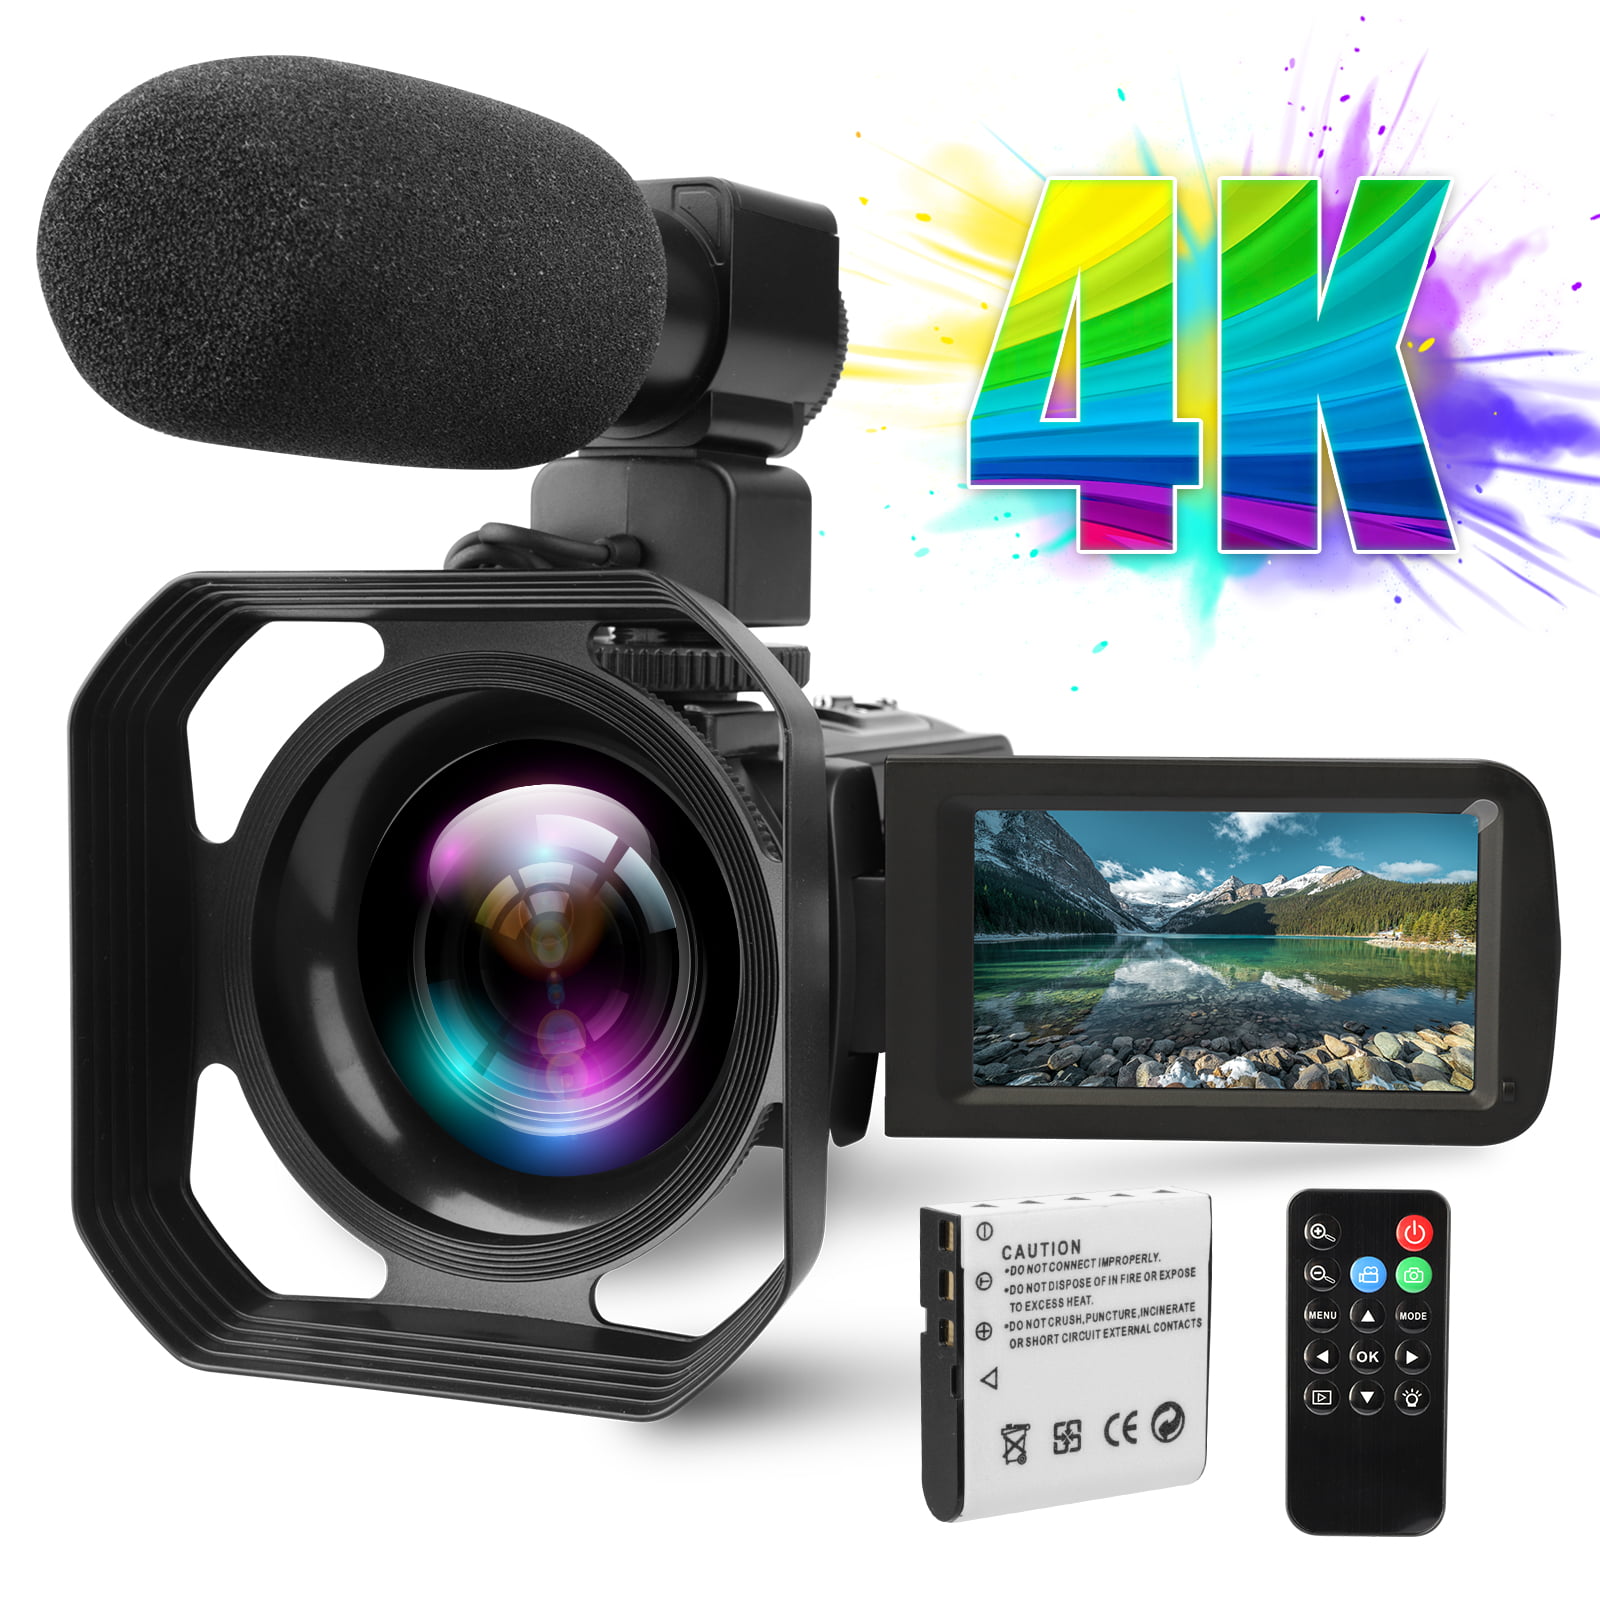 Video Camera Camcorder with Microphone WiFi IR Night Vision Vlogging Camera Ultra HD 2.7K 30FPS 24MP 16X Digital Zoom 3 LCD Touch Screen YouTube Camera Recorder 